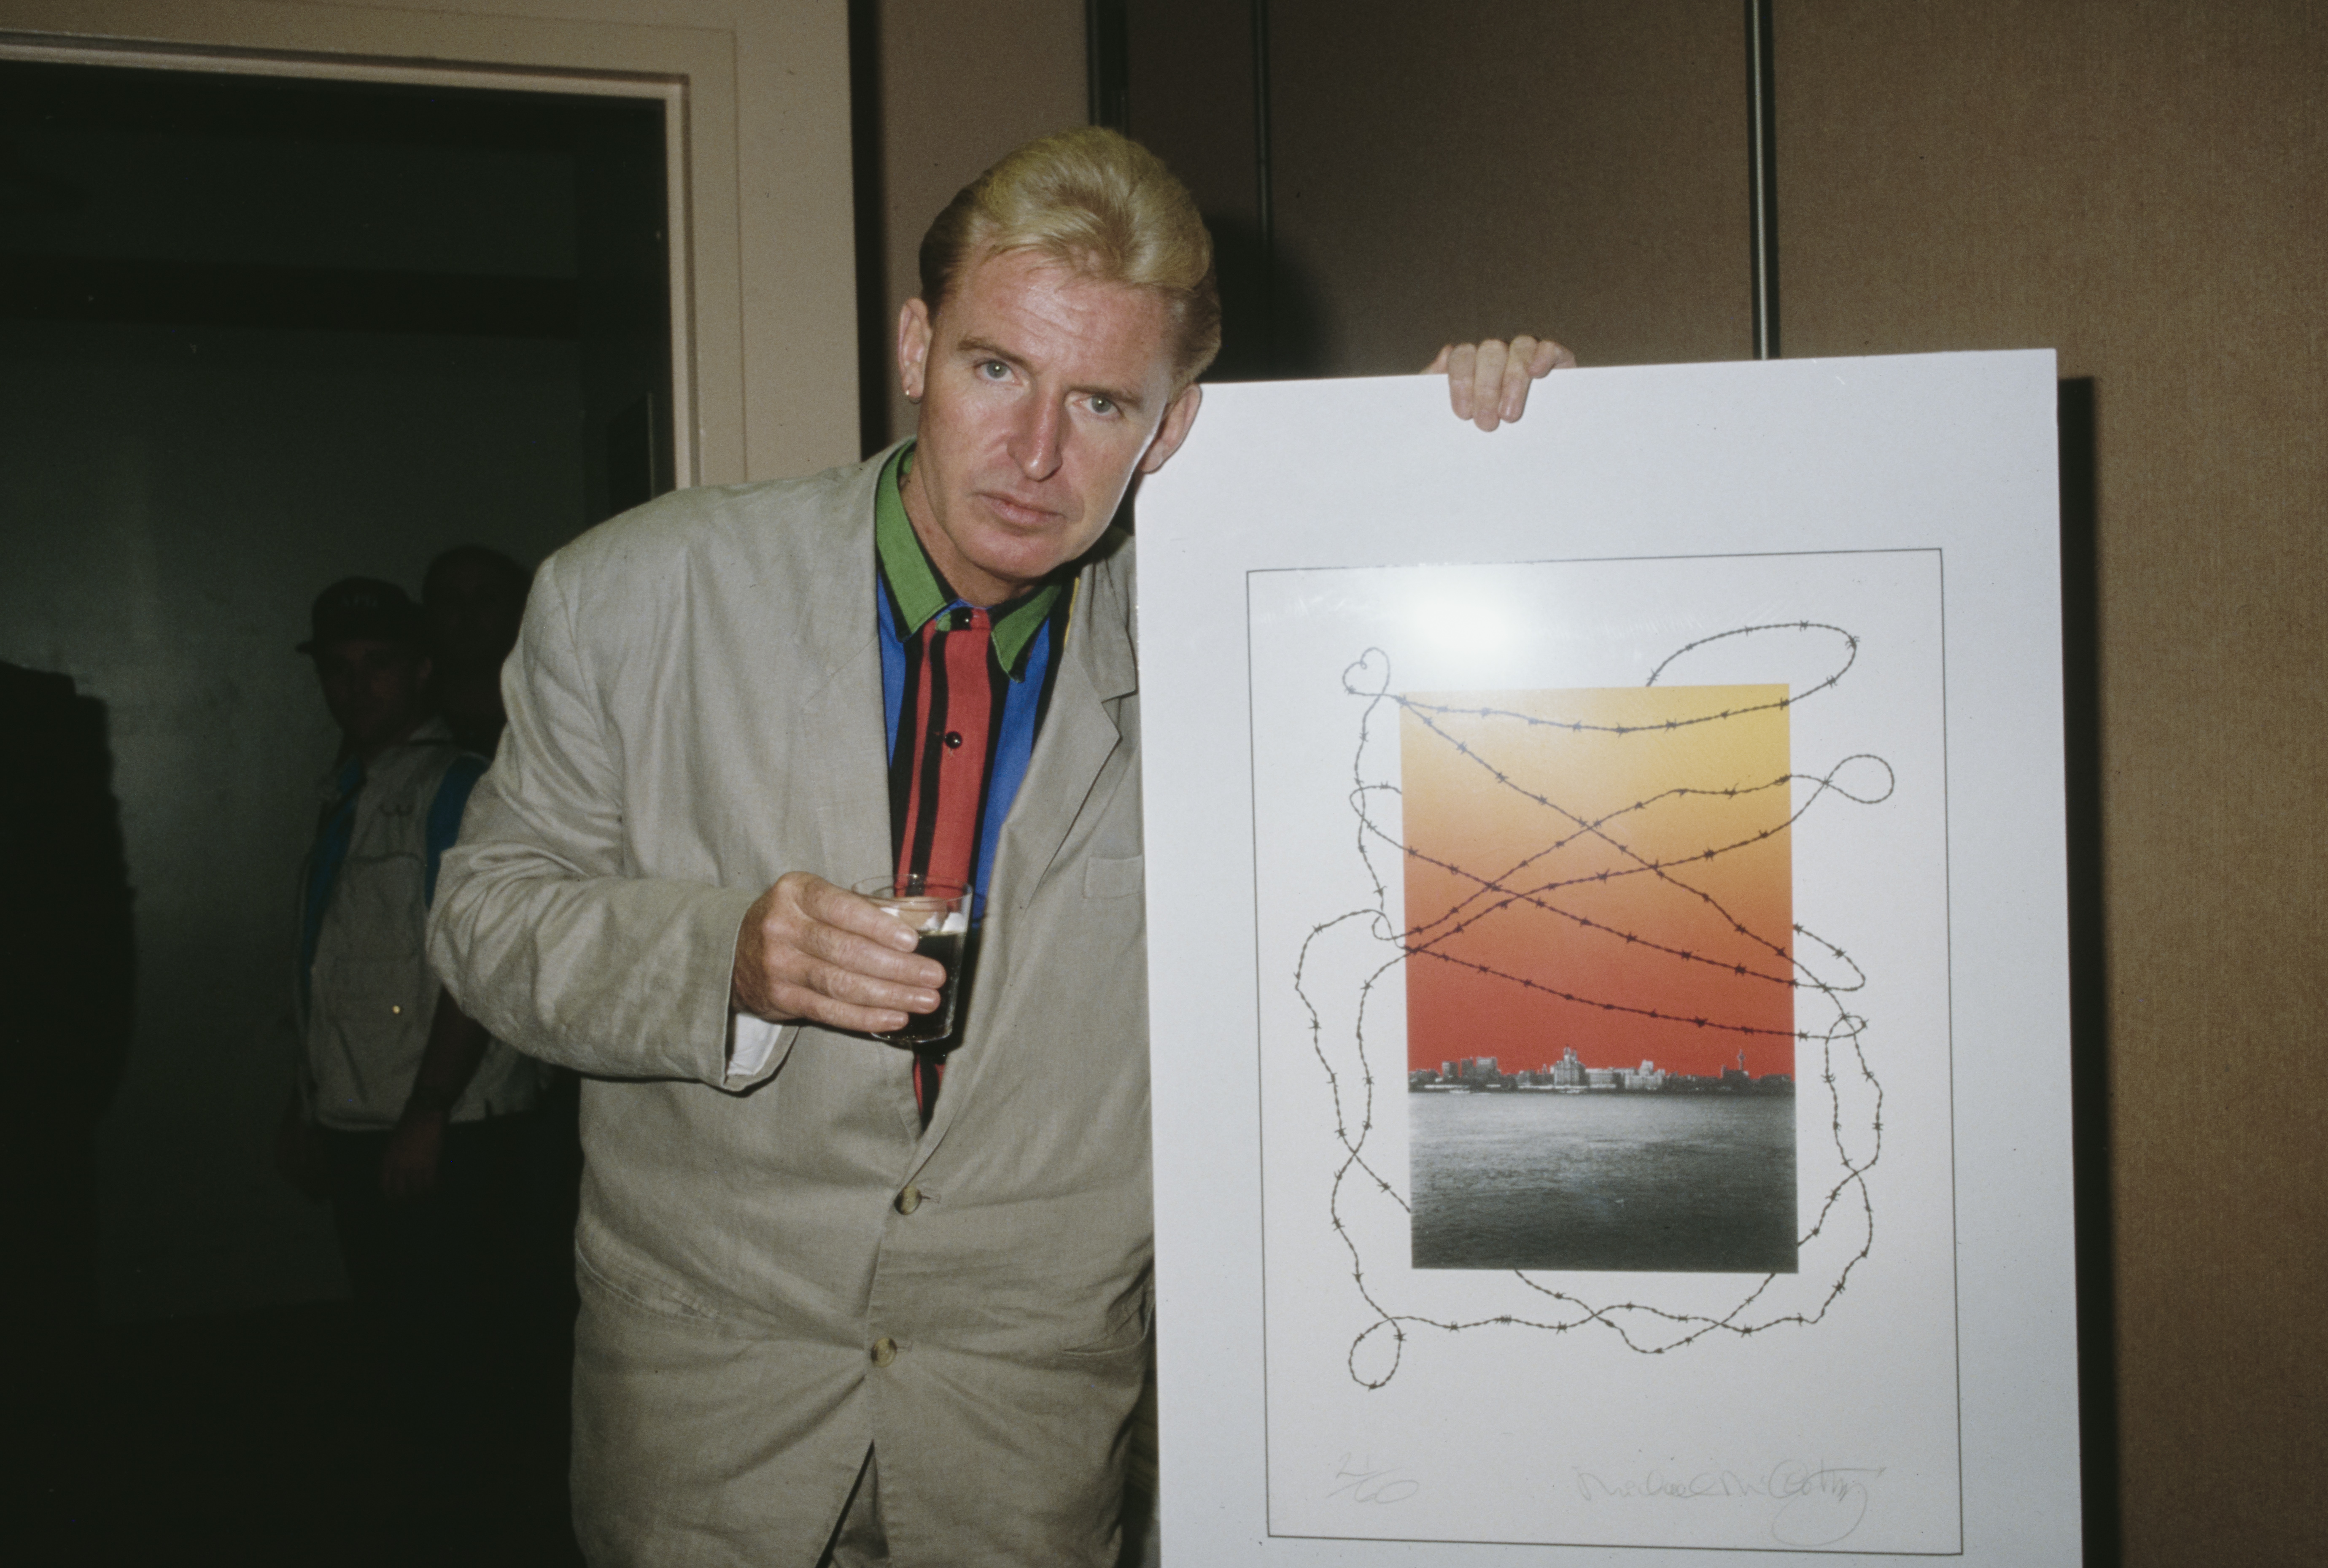 Michael McCartney during a publicity event for his photography and artwork, circa 1990 | Source: Getty Images